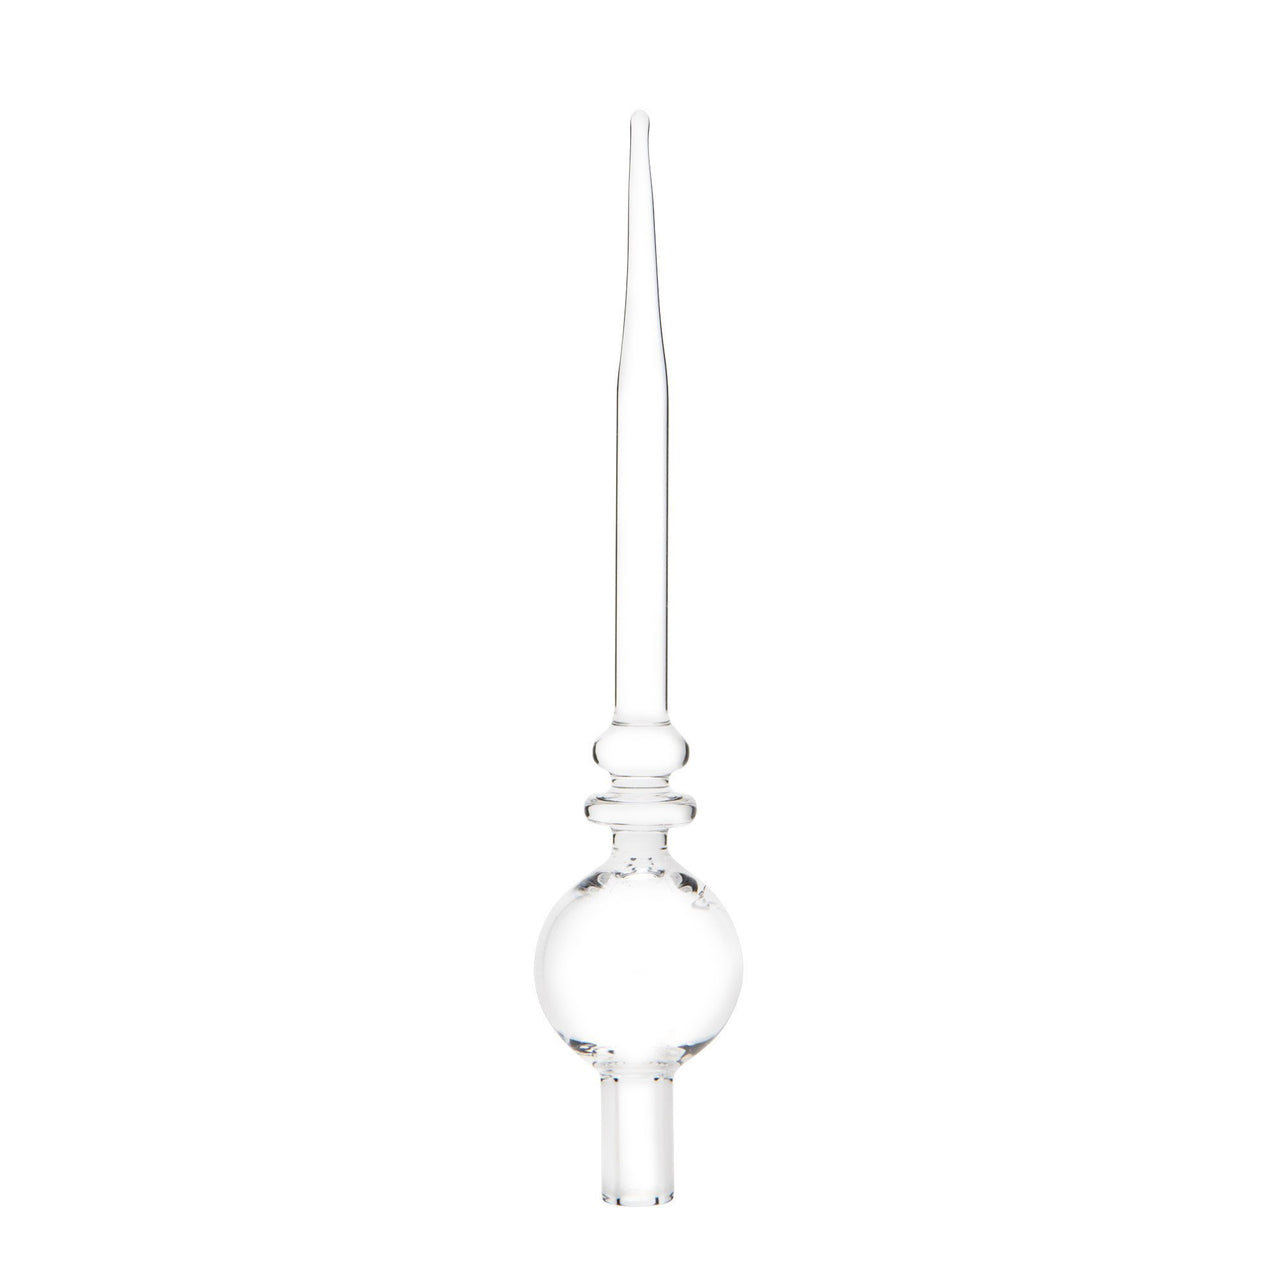 Home Blown Glass Road Runner Air-Cooled Dab Straw / $ 59.99 at 420